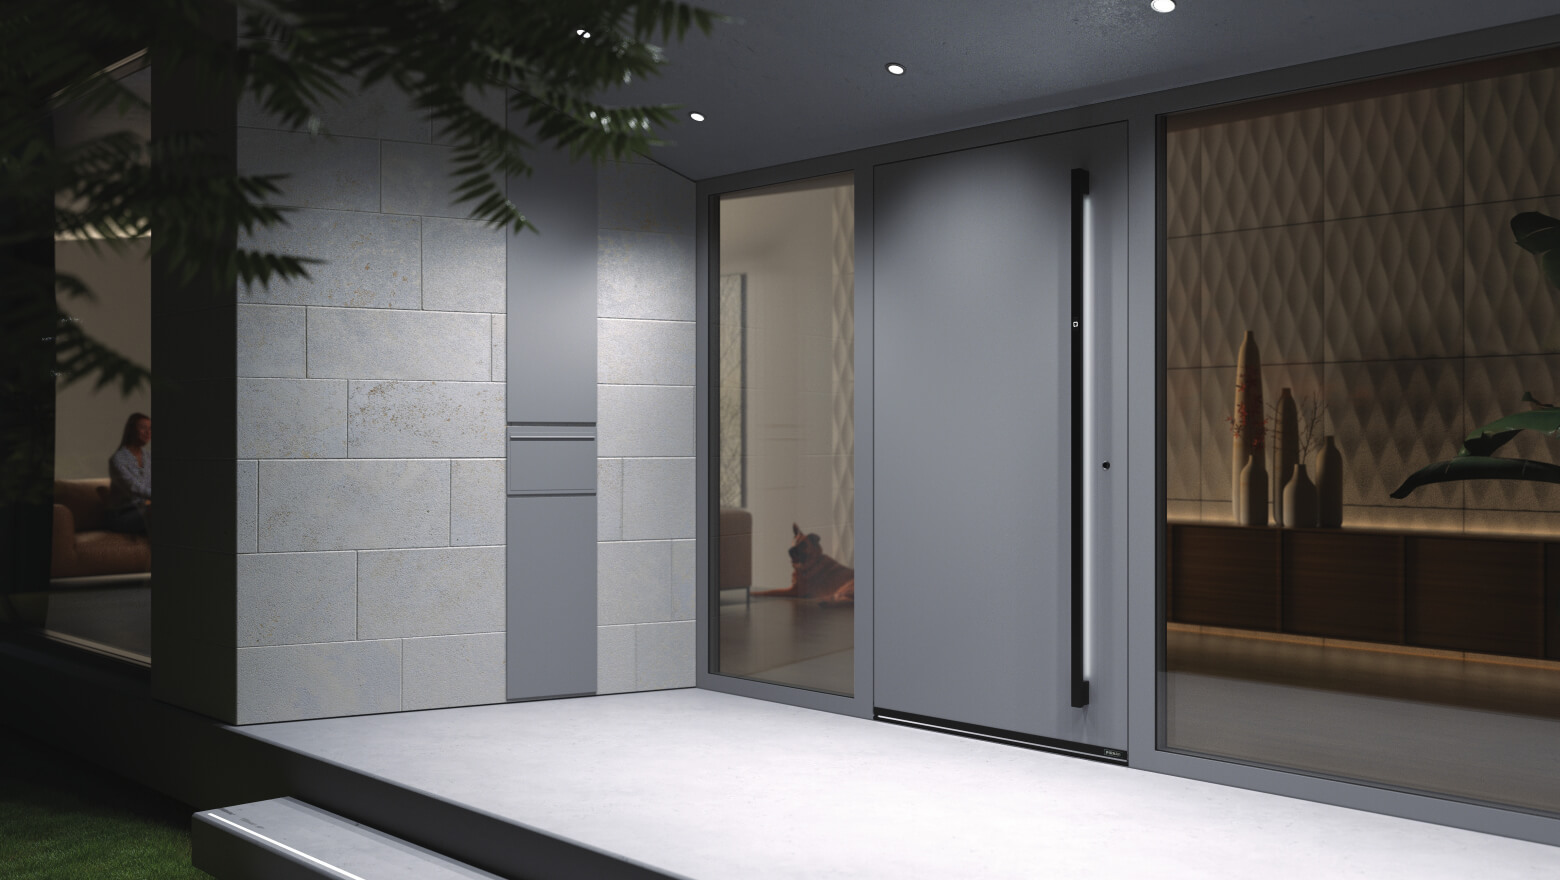 The contemporary style of doors is in